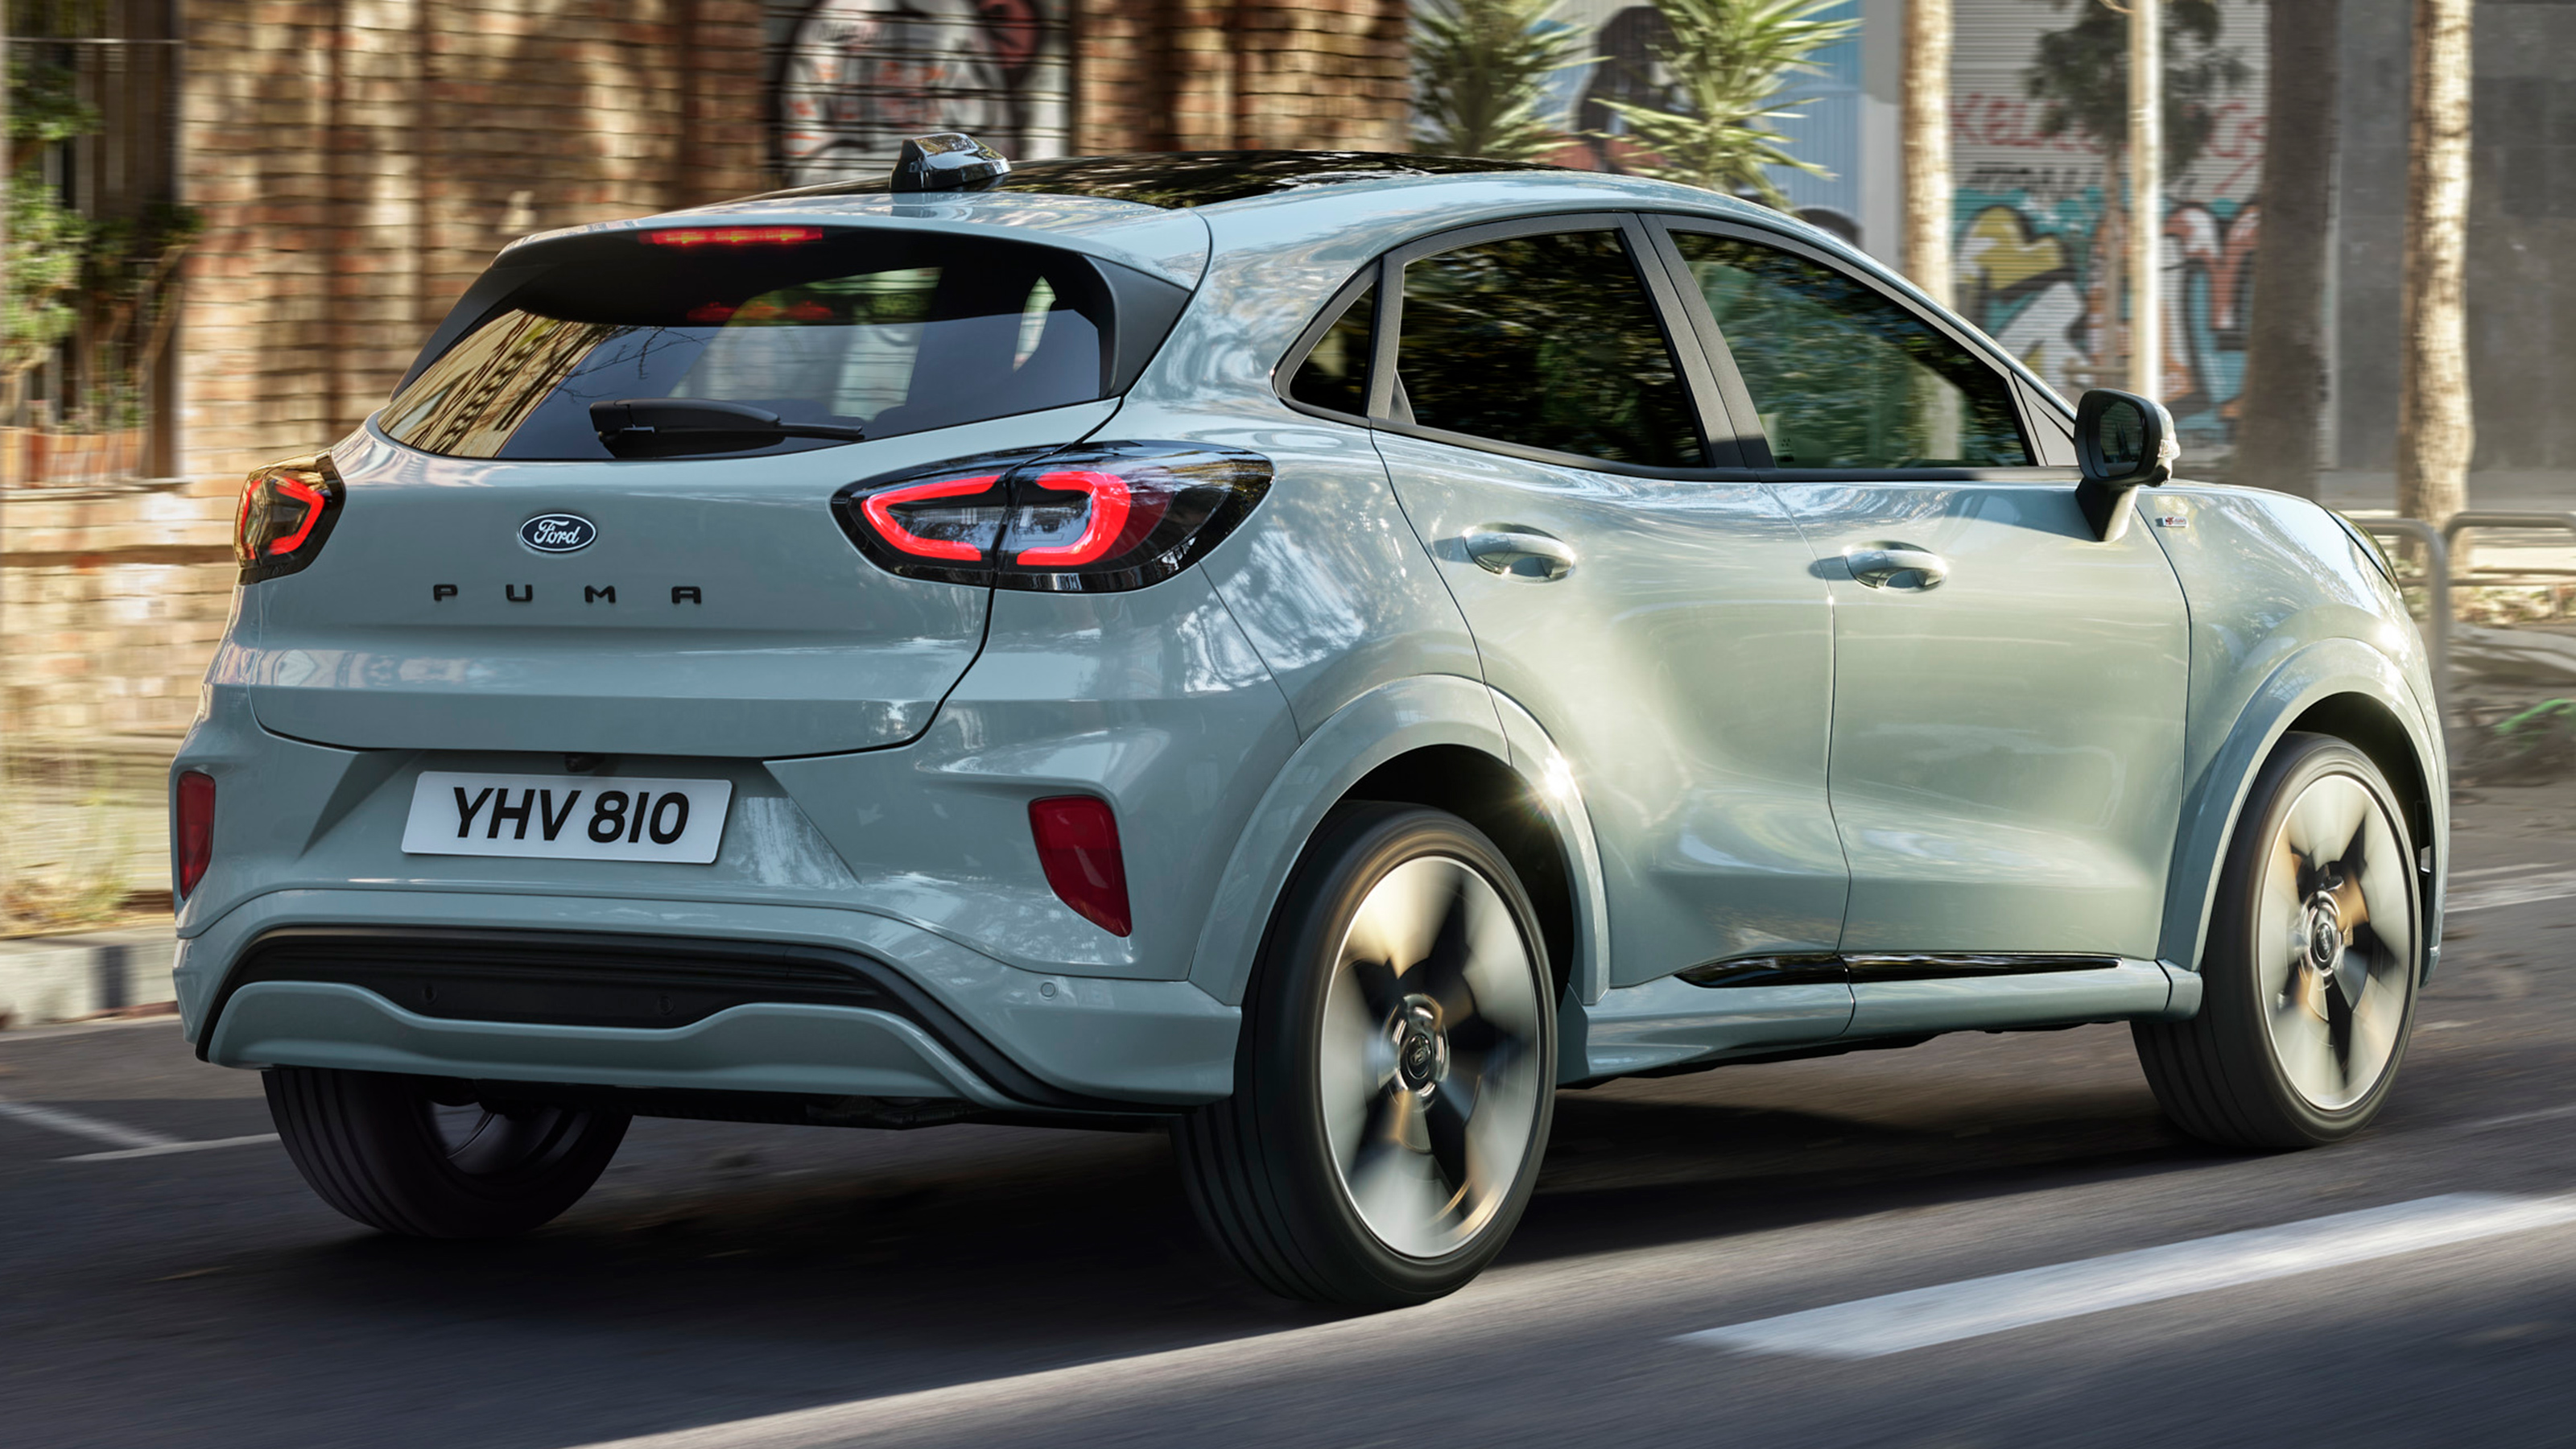 Electric Ford Puma Gen-E could soon become UK's top EV seller